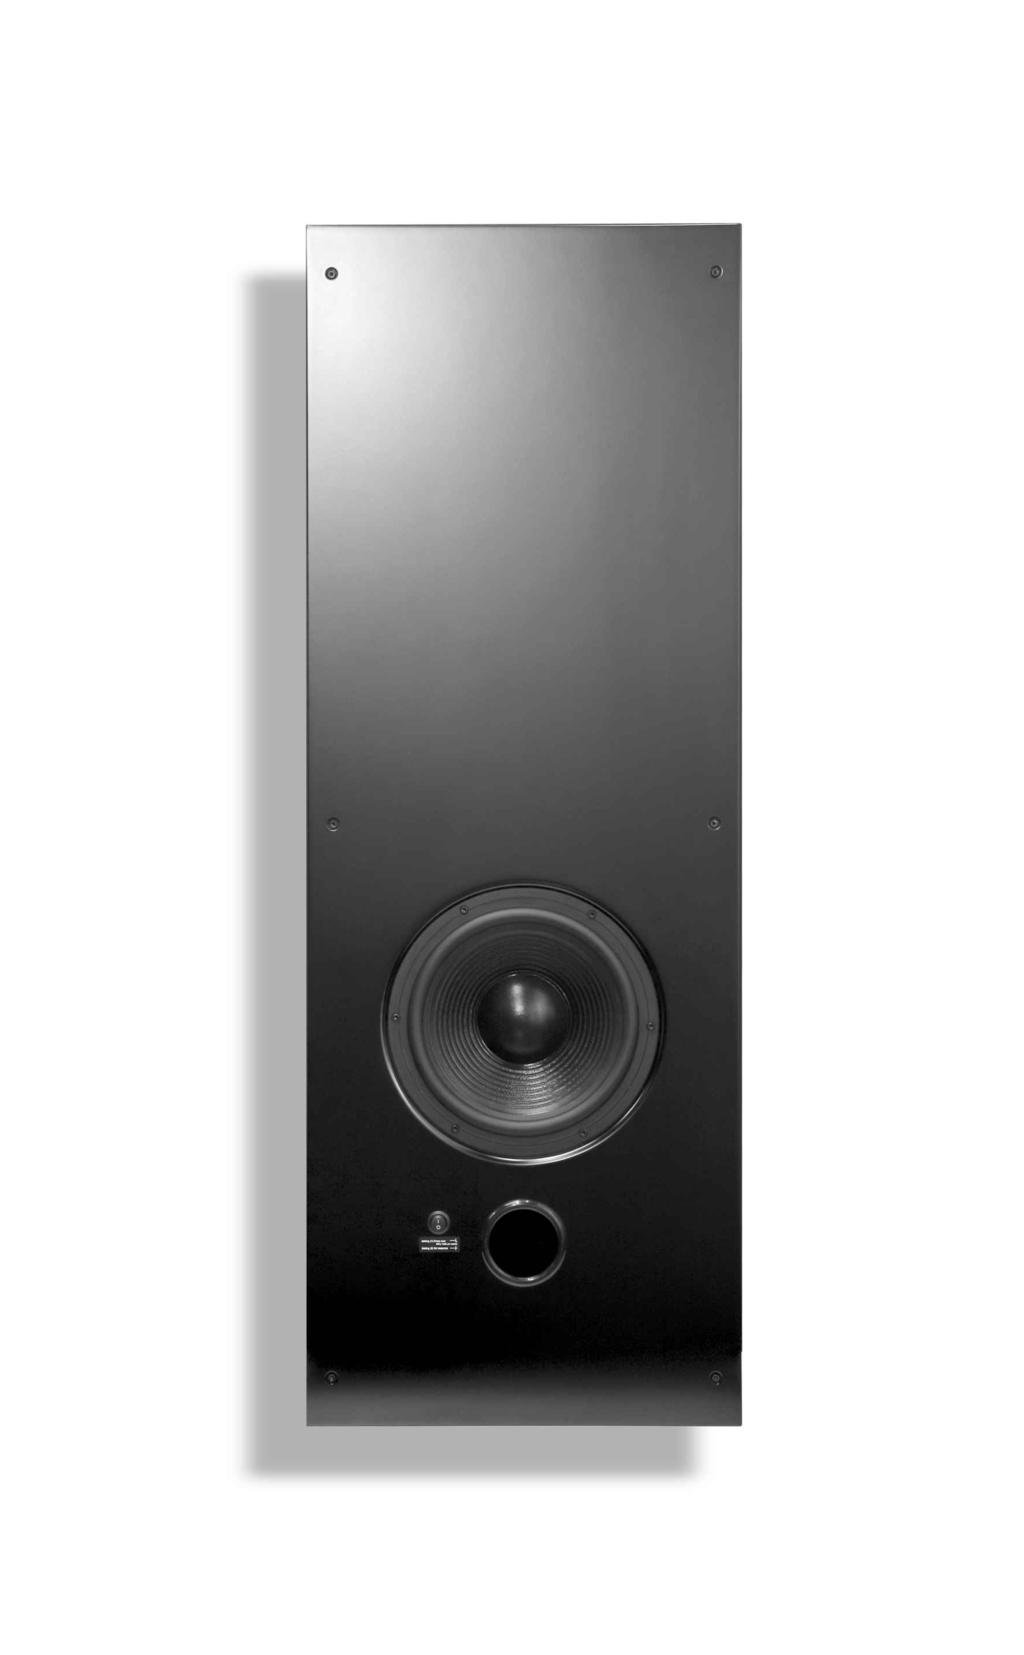 120-43 SL Subwoofer Single Coupled Professional Subwoofer Single Coupled Multi Purpose Professional Subwoofer Features: - Long throw bass units - High long term power handling - Very low distortion -